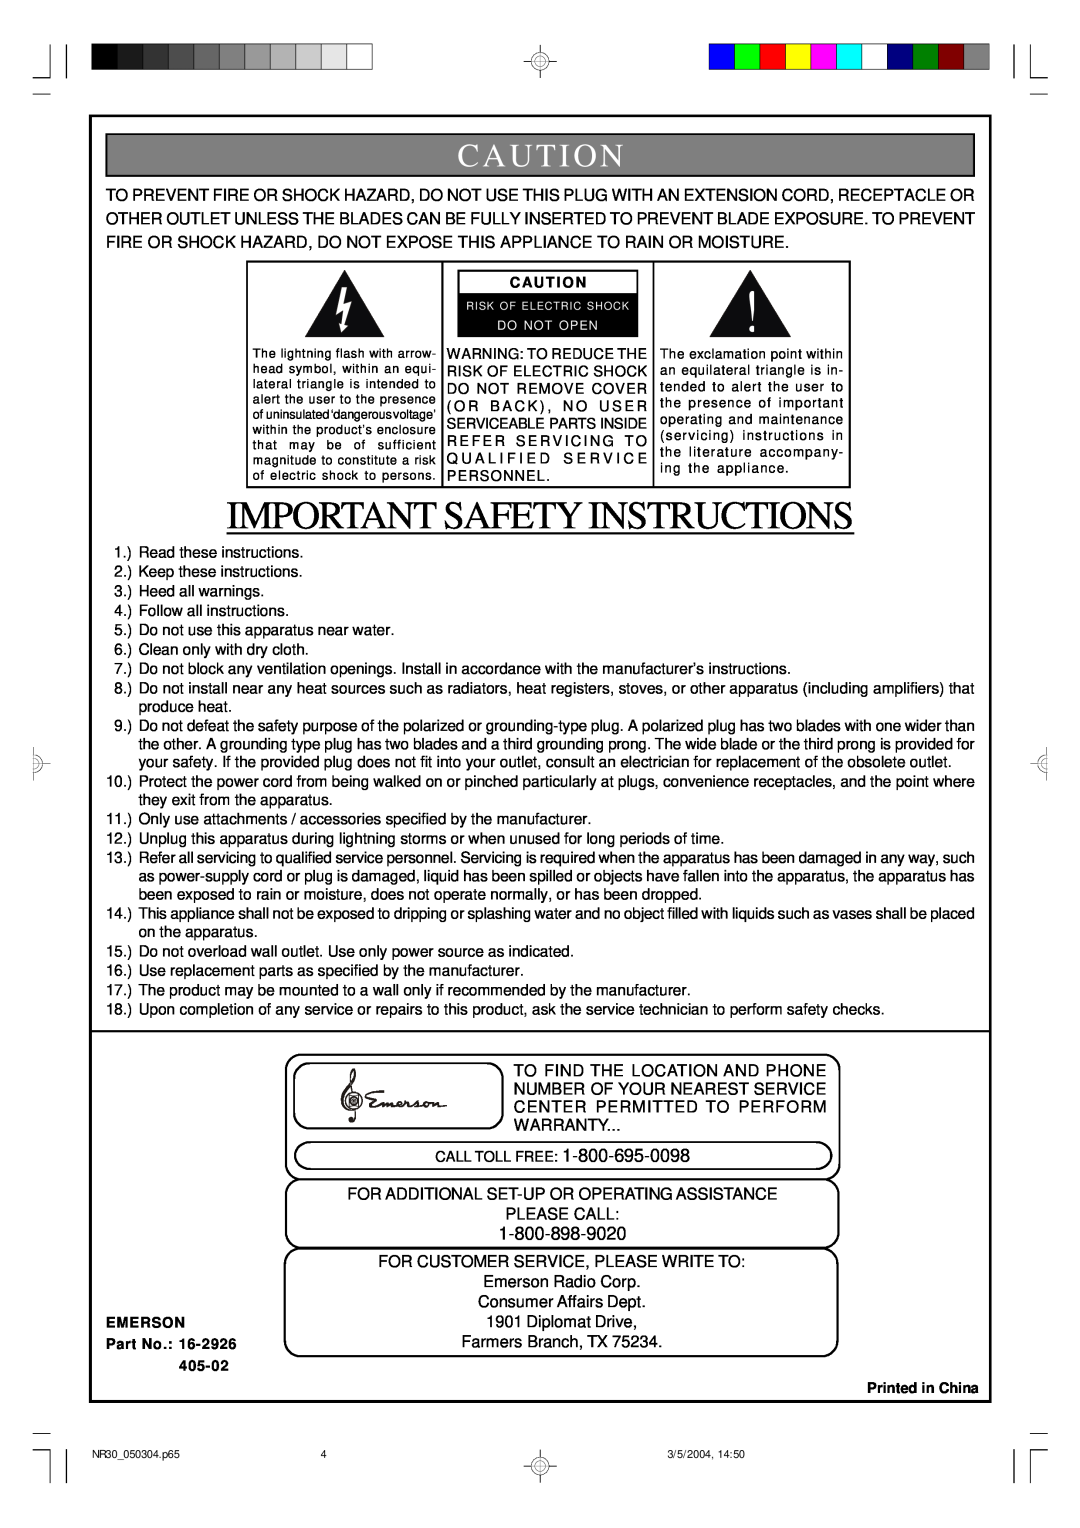 Emerson NR30 warranty Important Safety Instructions, Caut I On, Caut I O N, Emerson, 405-02 